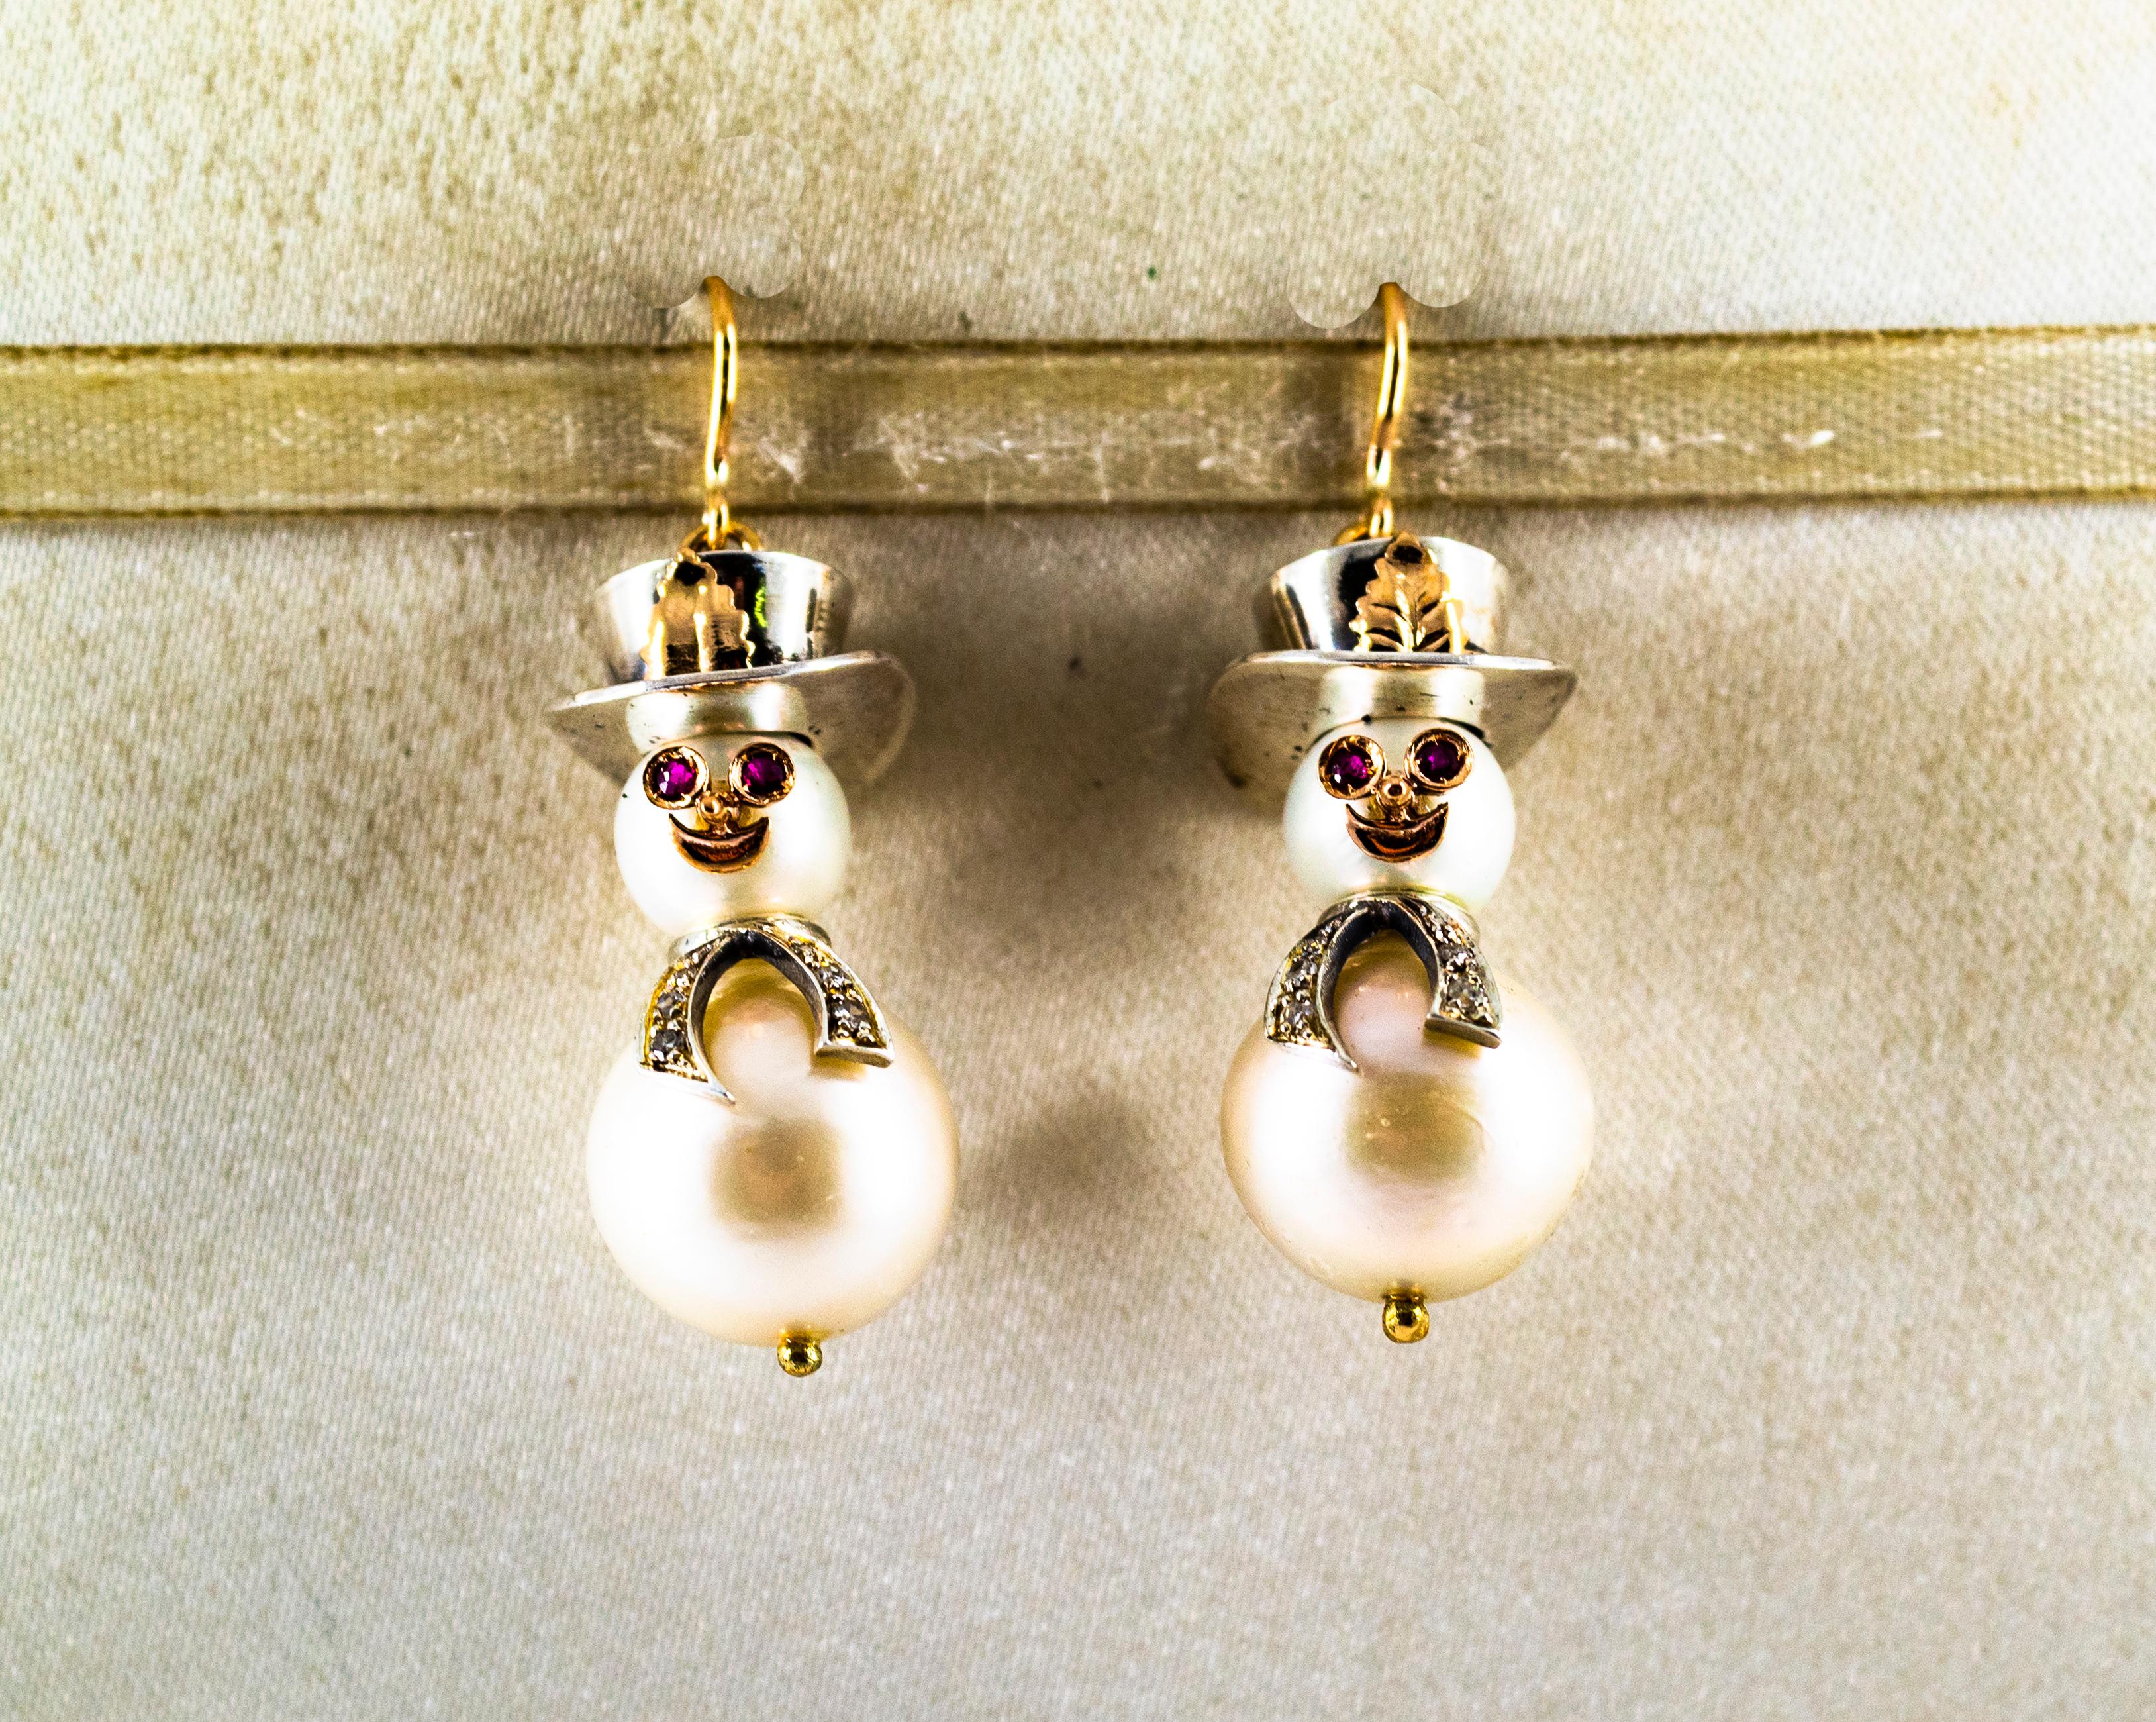 These Earrings are made of 9K Yellow Gold and Sterling Silver.
These Earrings have 0.15 Carats of White Modern Round Cut Diamonds.
These Earrings have 0.08 Carats of Rubies.
These Earrings have also two Indonesian Pearls and two Japanese